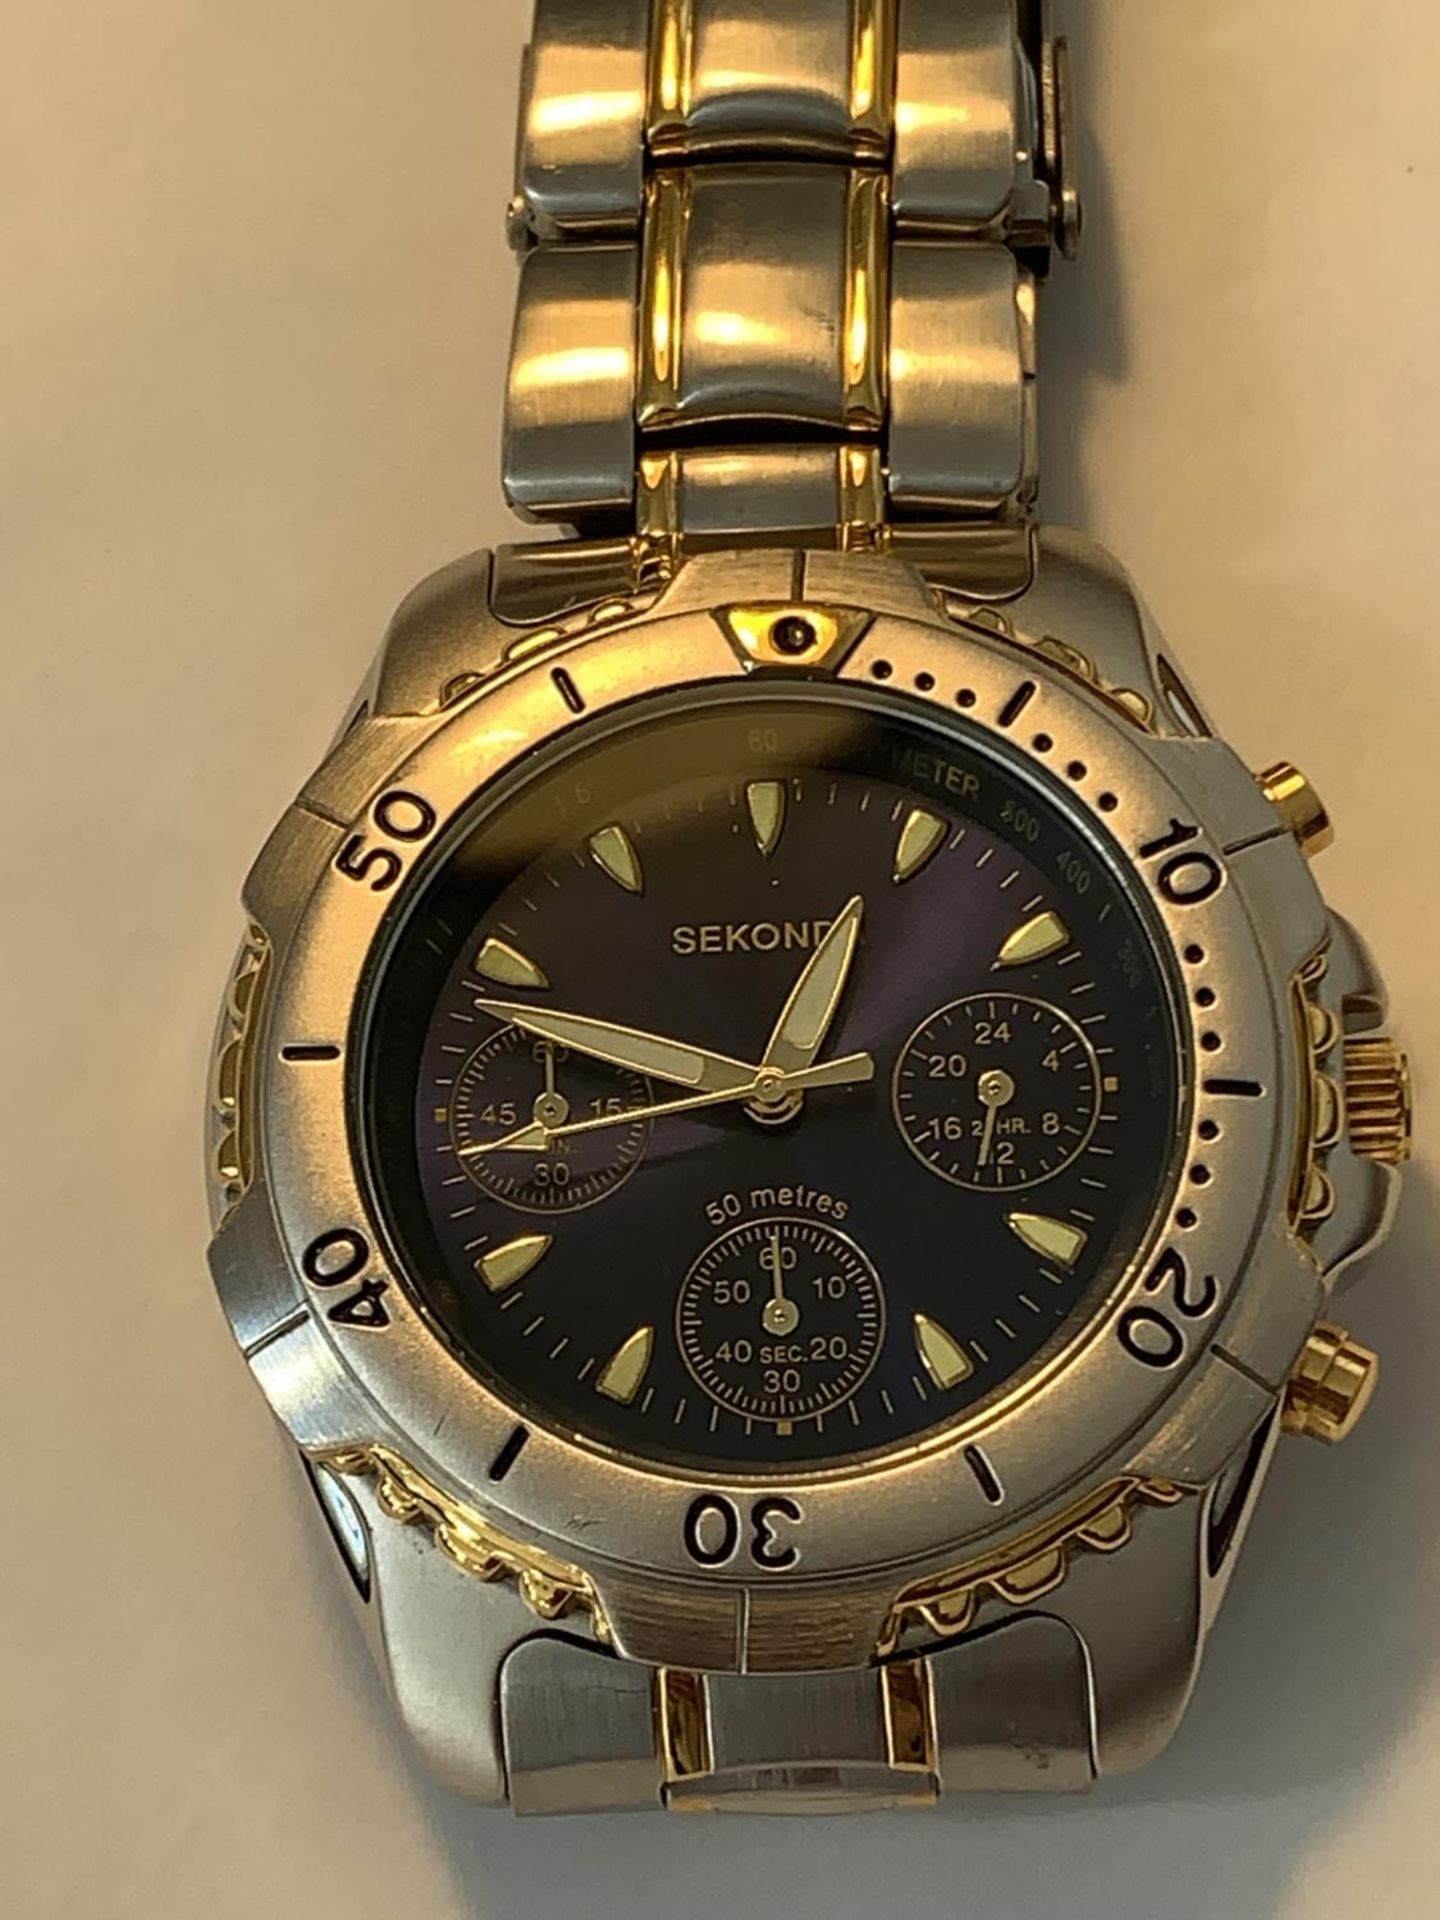 A SECONDA WRISTWATCH SEEN WORKING BUT NO WARRANTY - Image 2 of 3